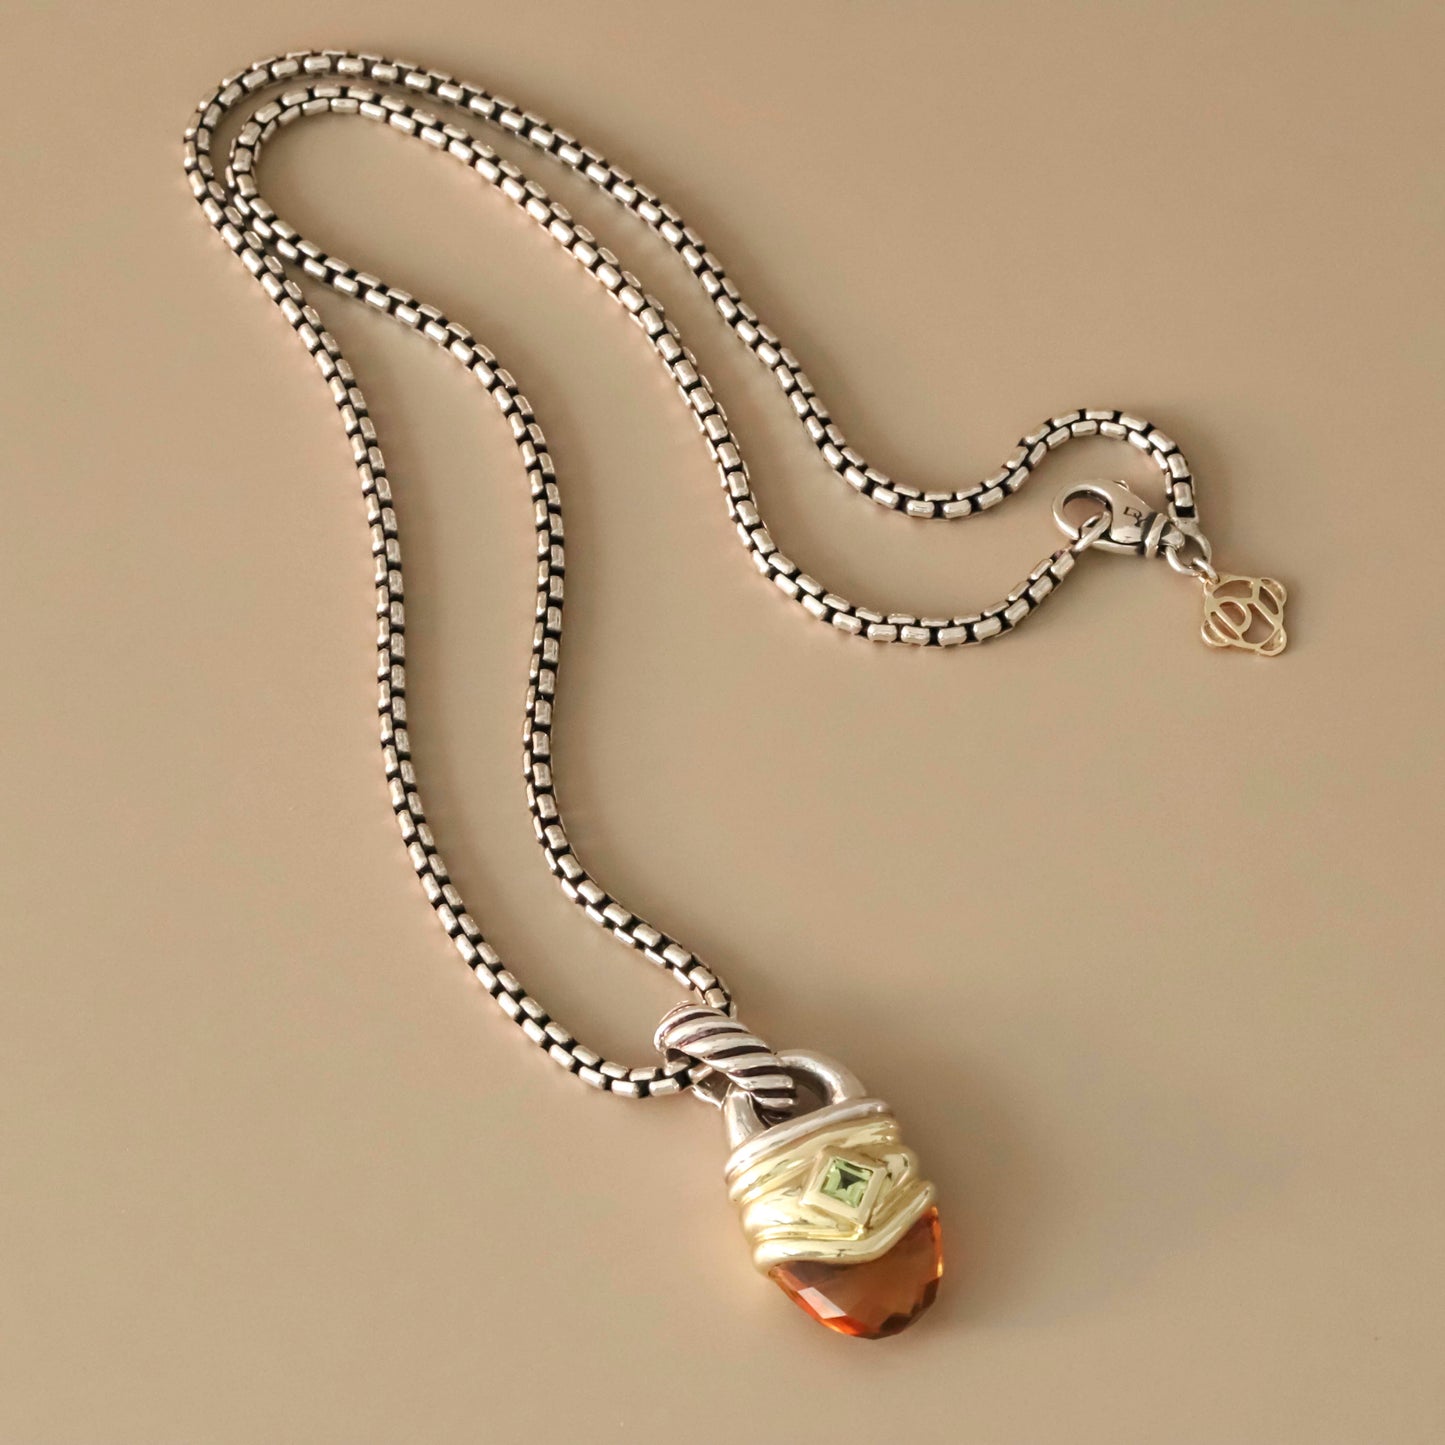 David Yurman Gemstone Pendant Necklace in Sterling Silver and 14k Gold